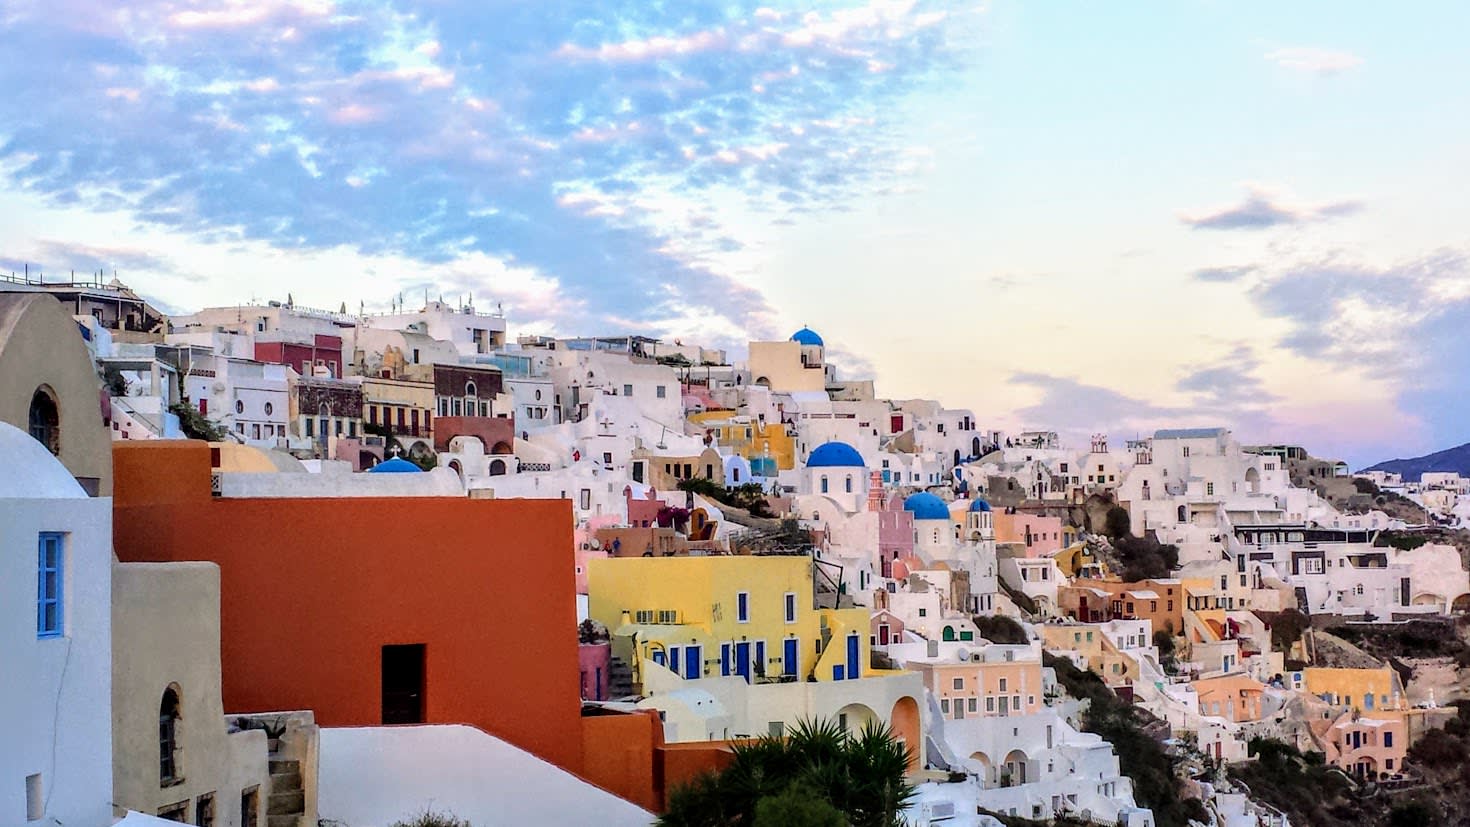 Santorini in One Day - What to see if you only have 1 day in Santorini